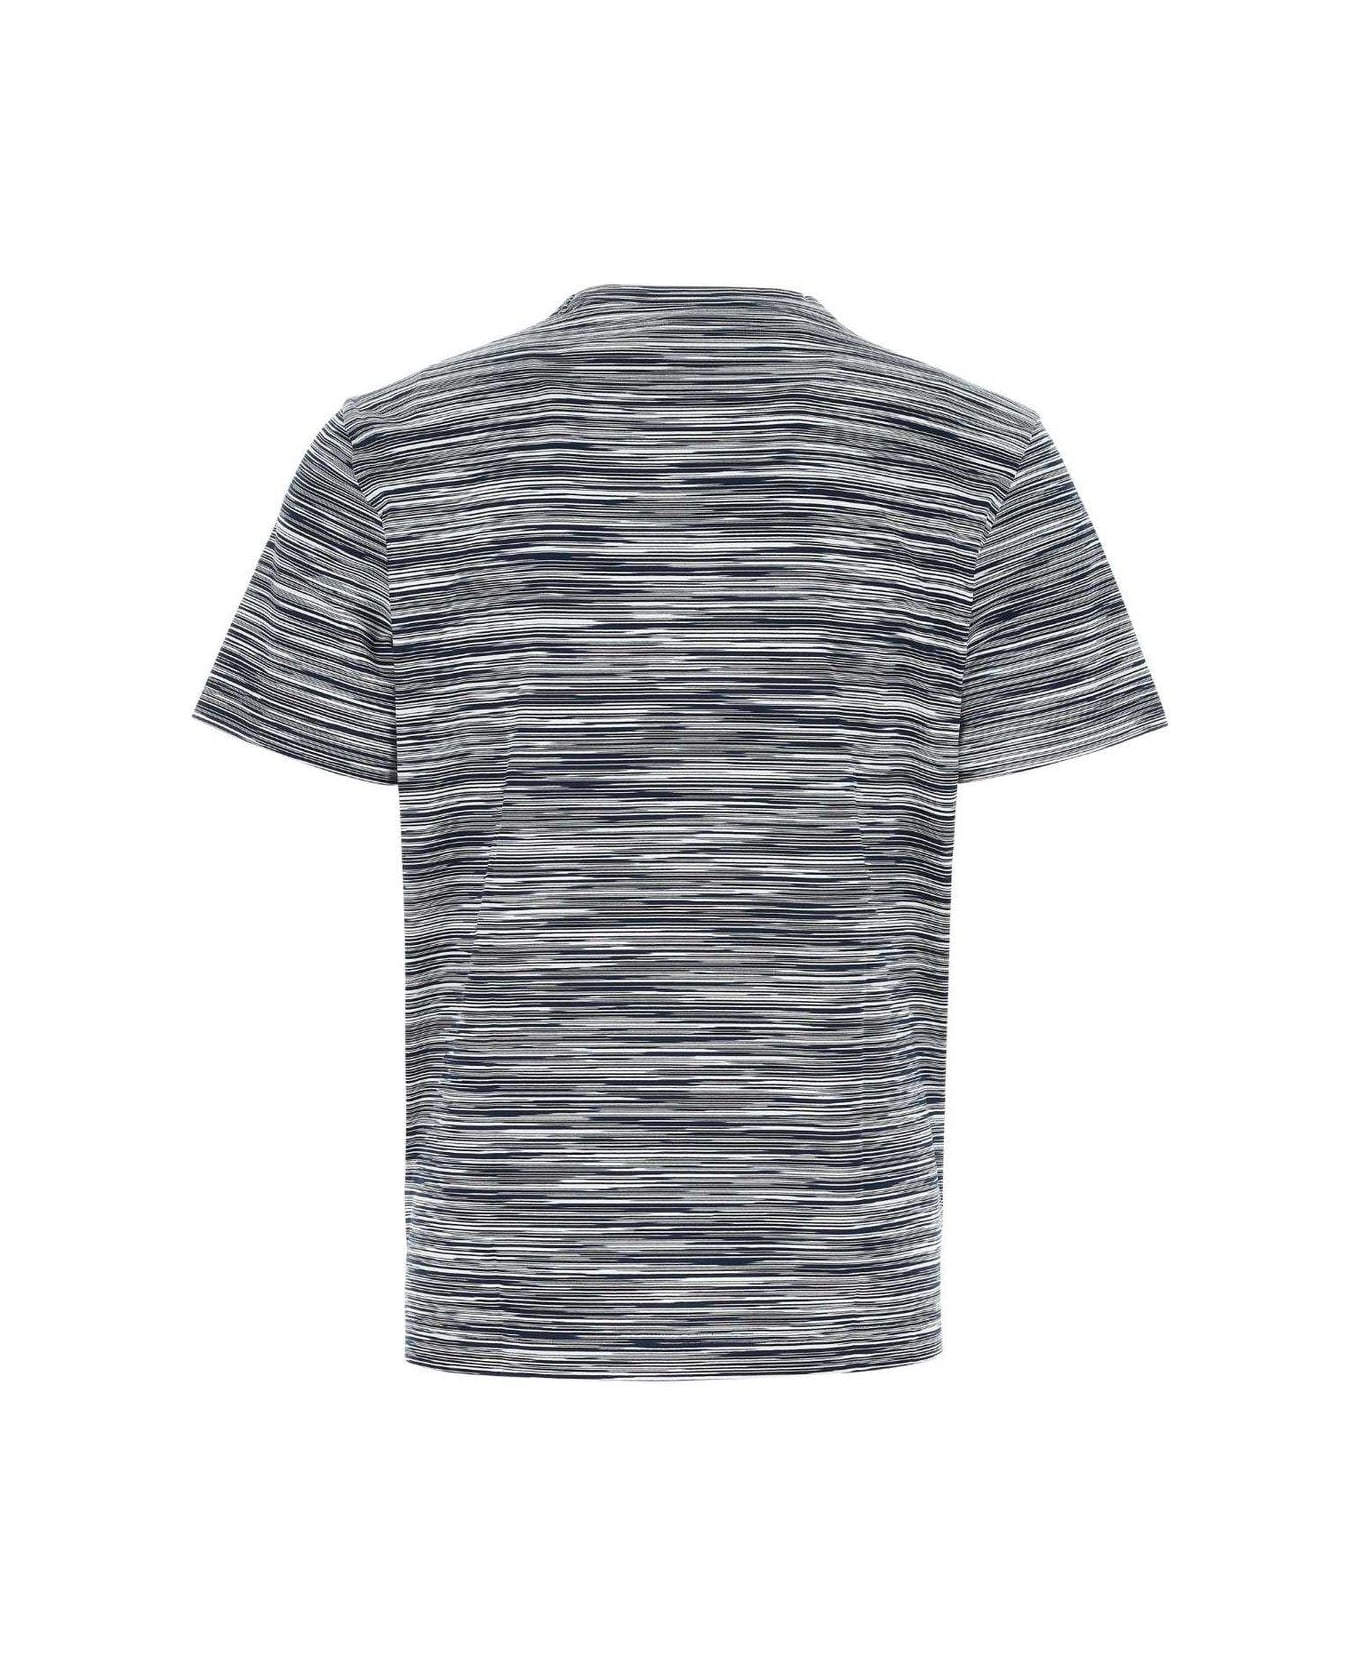 Missoni Striped Knitted Crewneck T-shirt - NAVY